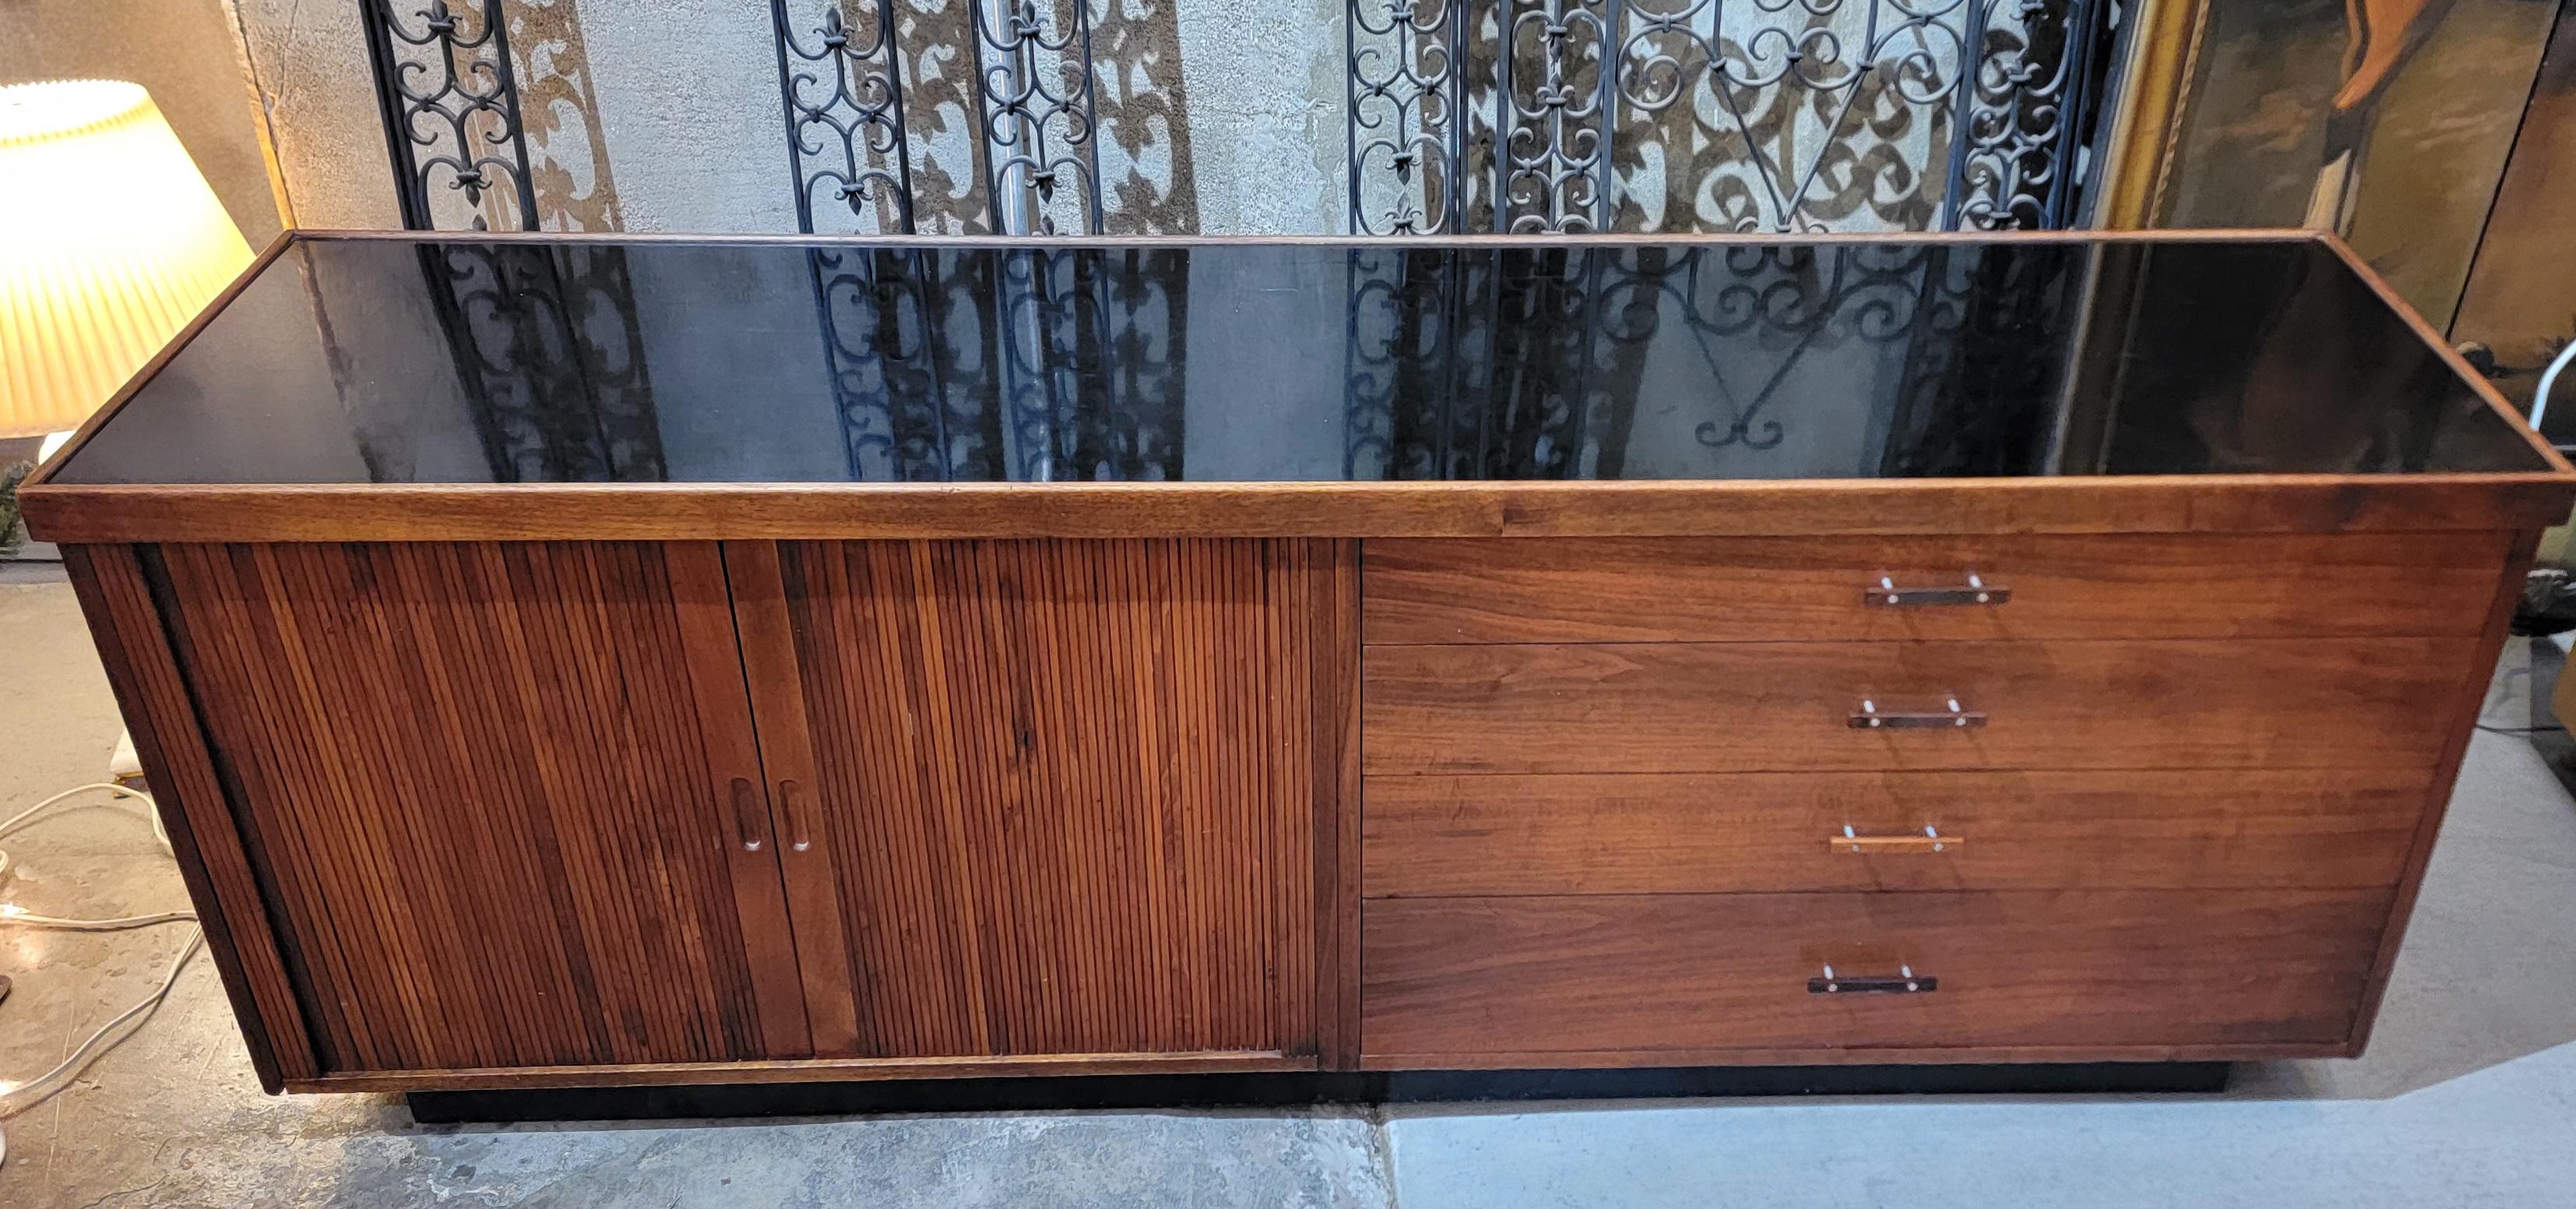 Tambour Door Credenza by Milo Baughman for Glenn of California In Good Condition For Sale In Fulton, CA